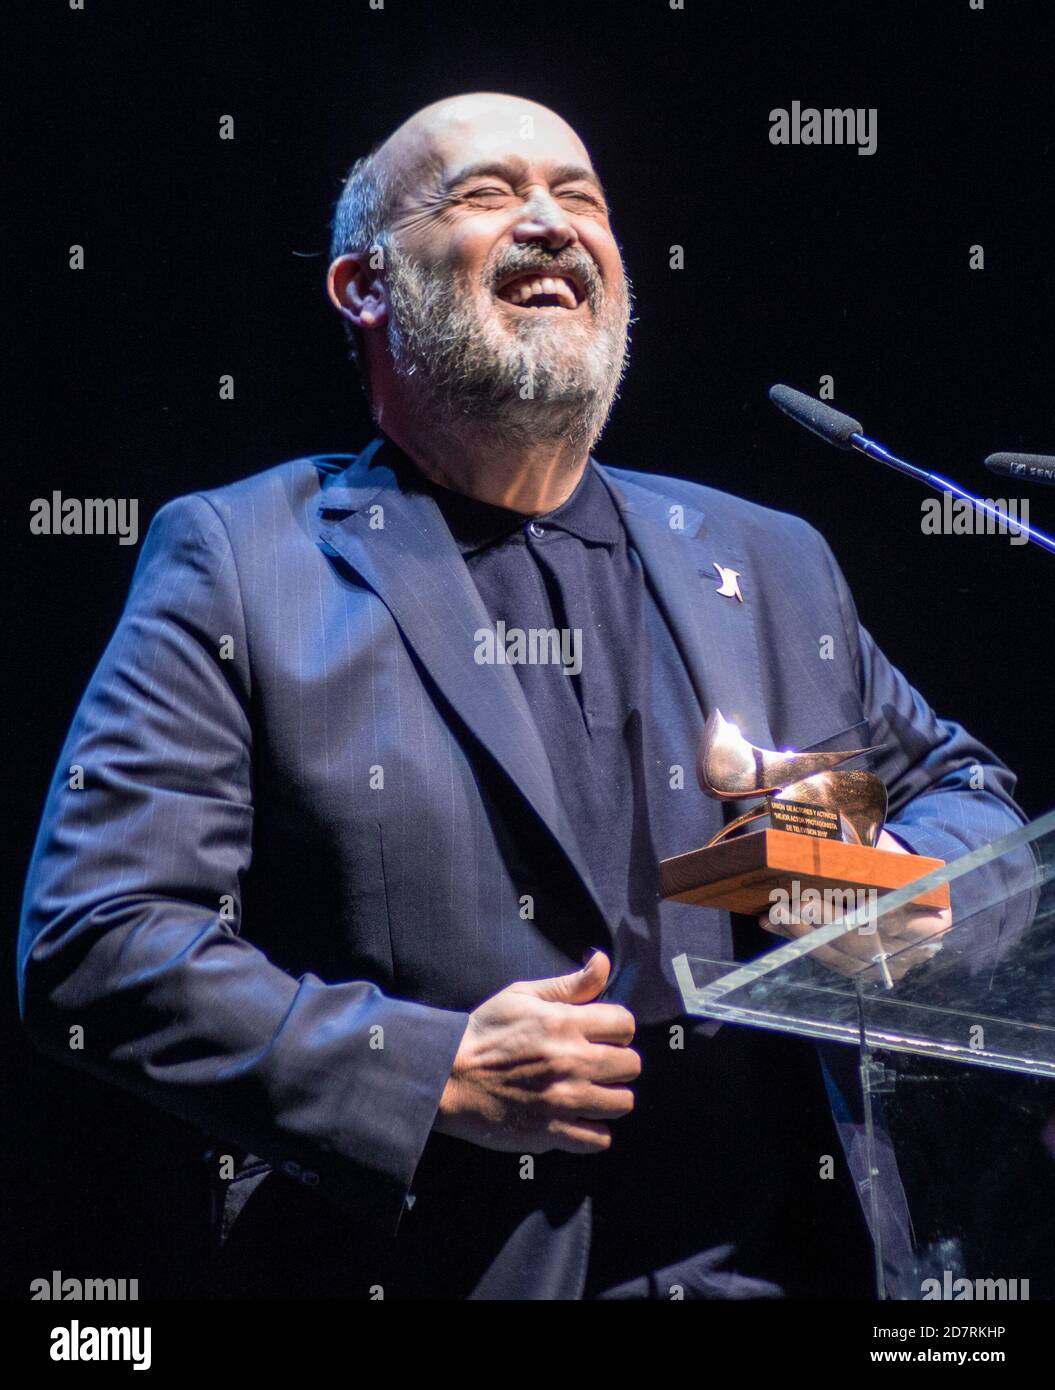 Javier Camara receives his award from 'Union de Actores' Awards 2020 at Teatro Circo Price in Madrid, Spain.March 09, 2020. (Oscar Gil / Alfa Images) Stock Photo